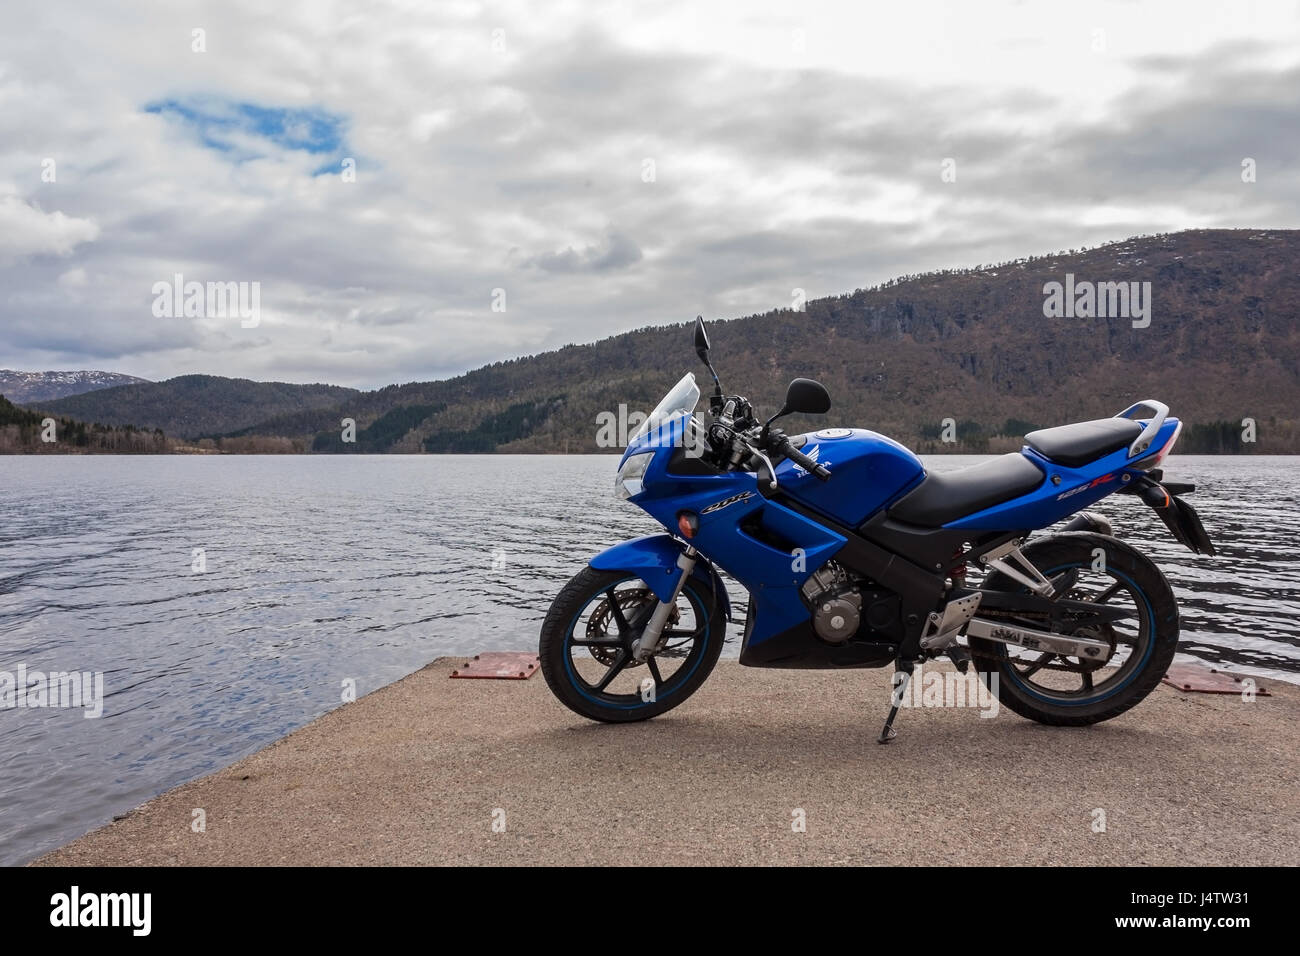 Honda 125 Motorbike High Resolution Stock Photography And Images Alamy